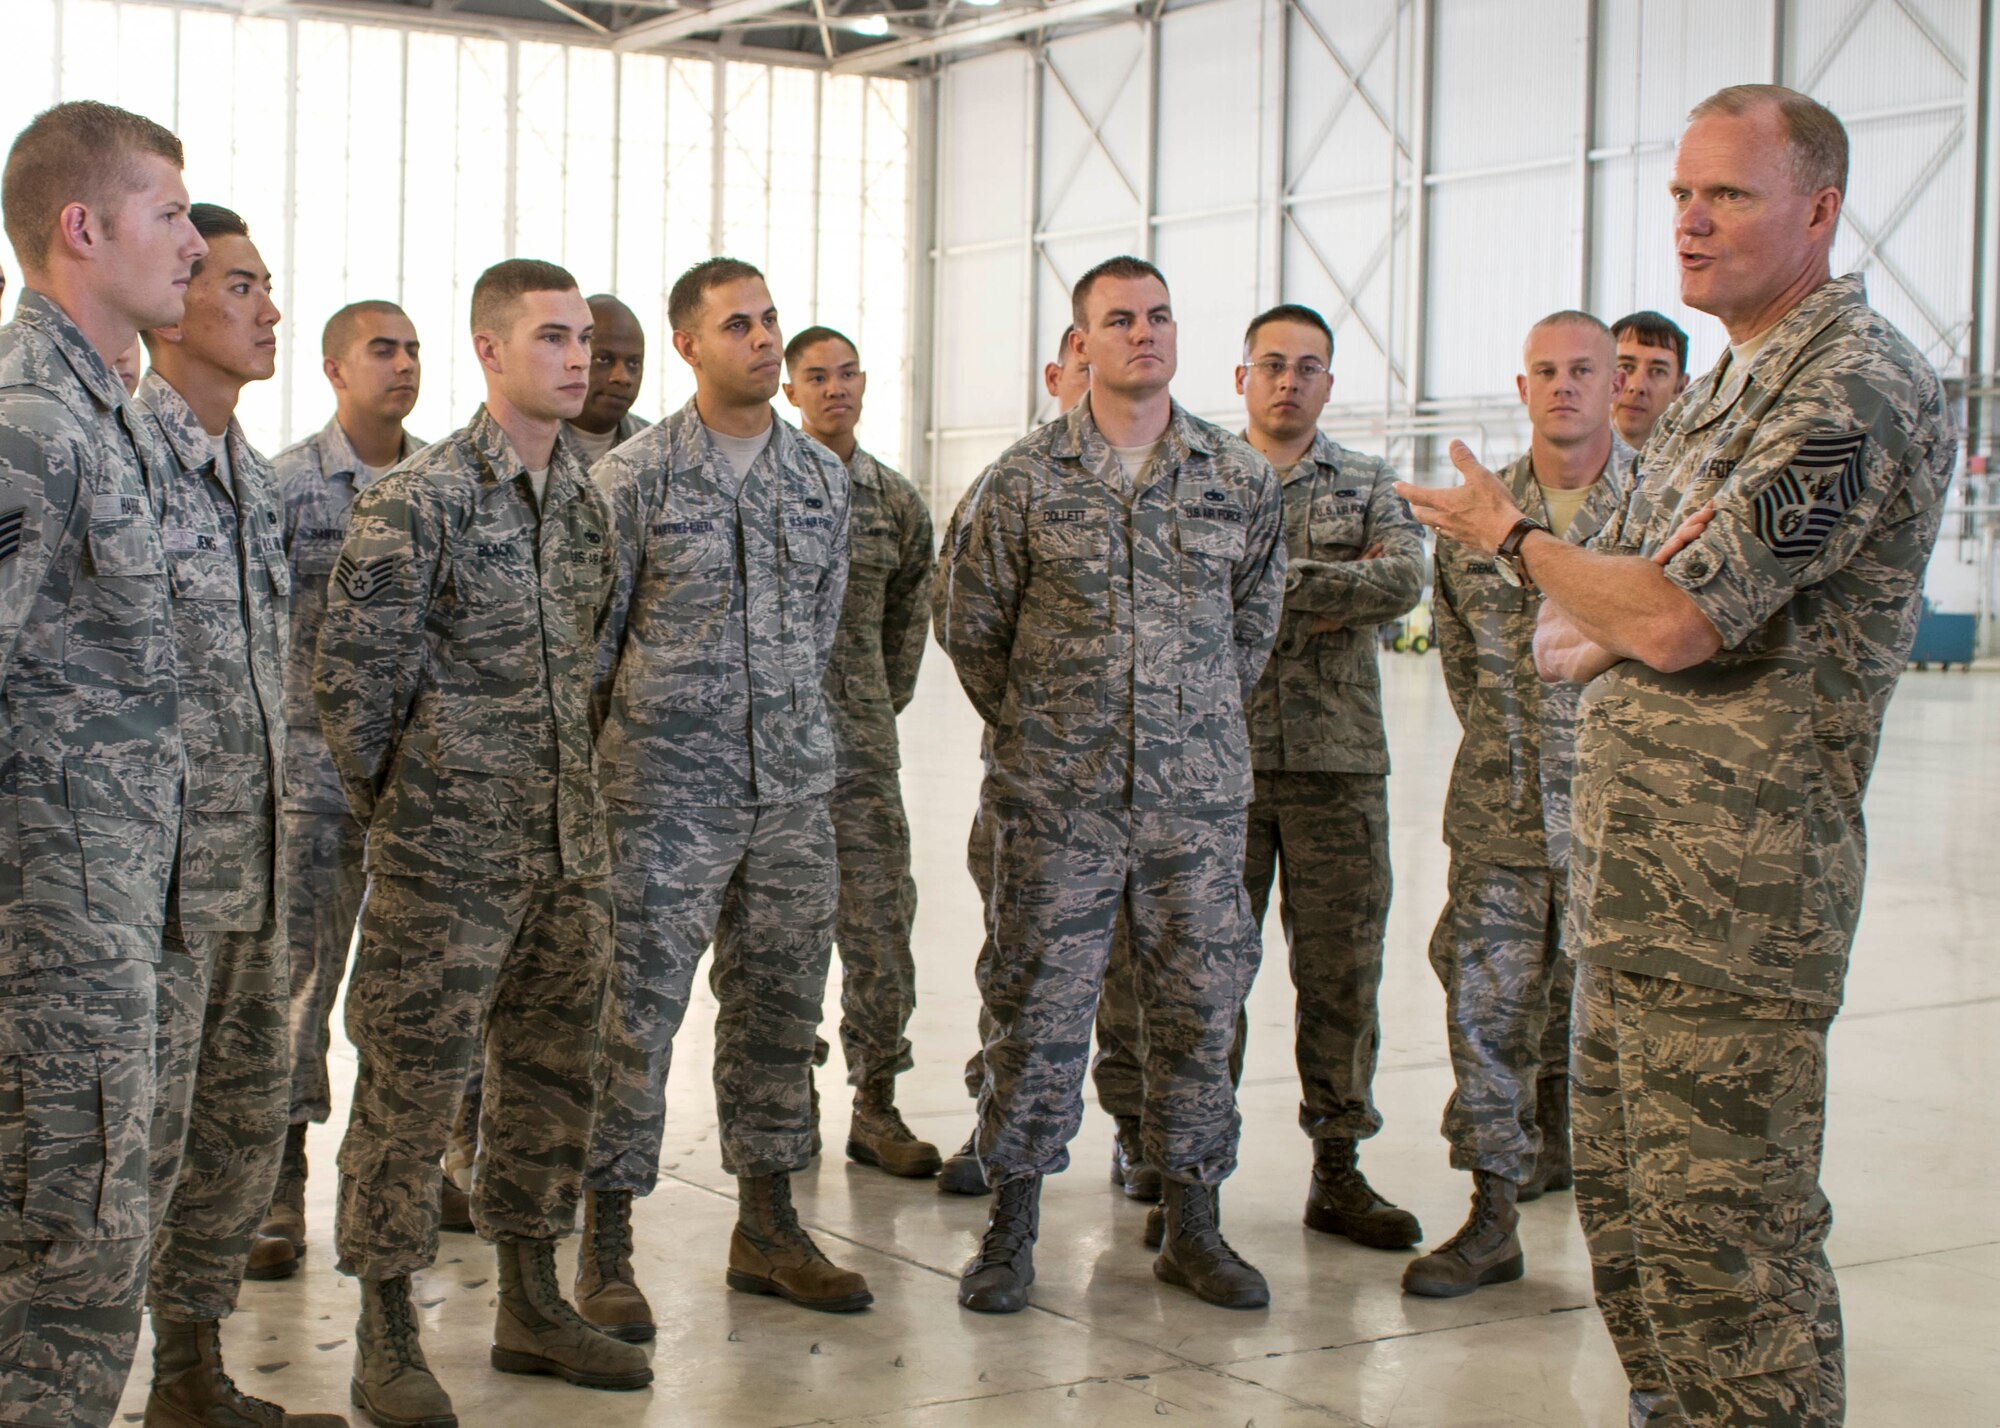 Chief Master Sergeant of the Air Force James A. Cody, right, speaks with Airmen of the 412th Maintenance Group during his visit July 14, 2014, on Edwards Air Force Base, Calif. (U.S. Air Force photo/Aaron Lewis)